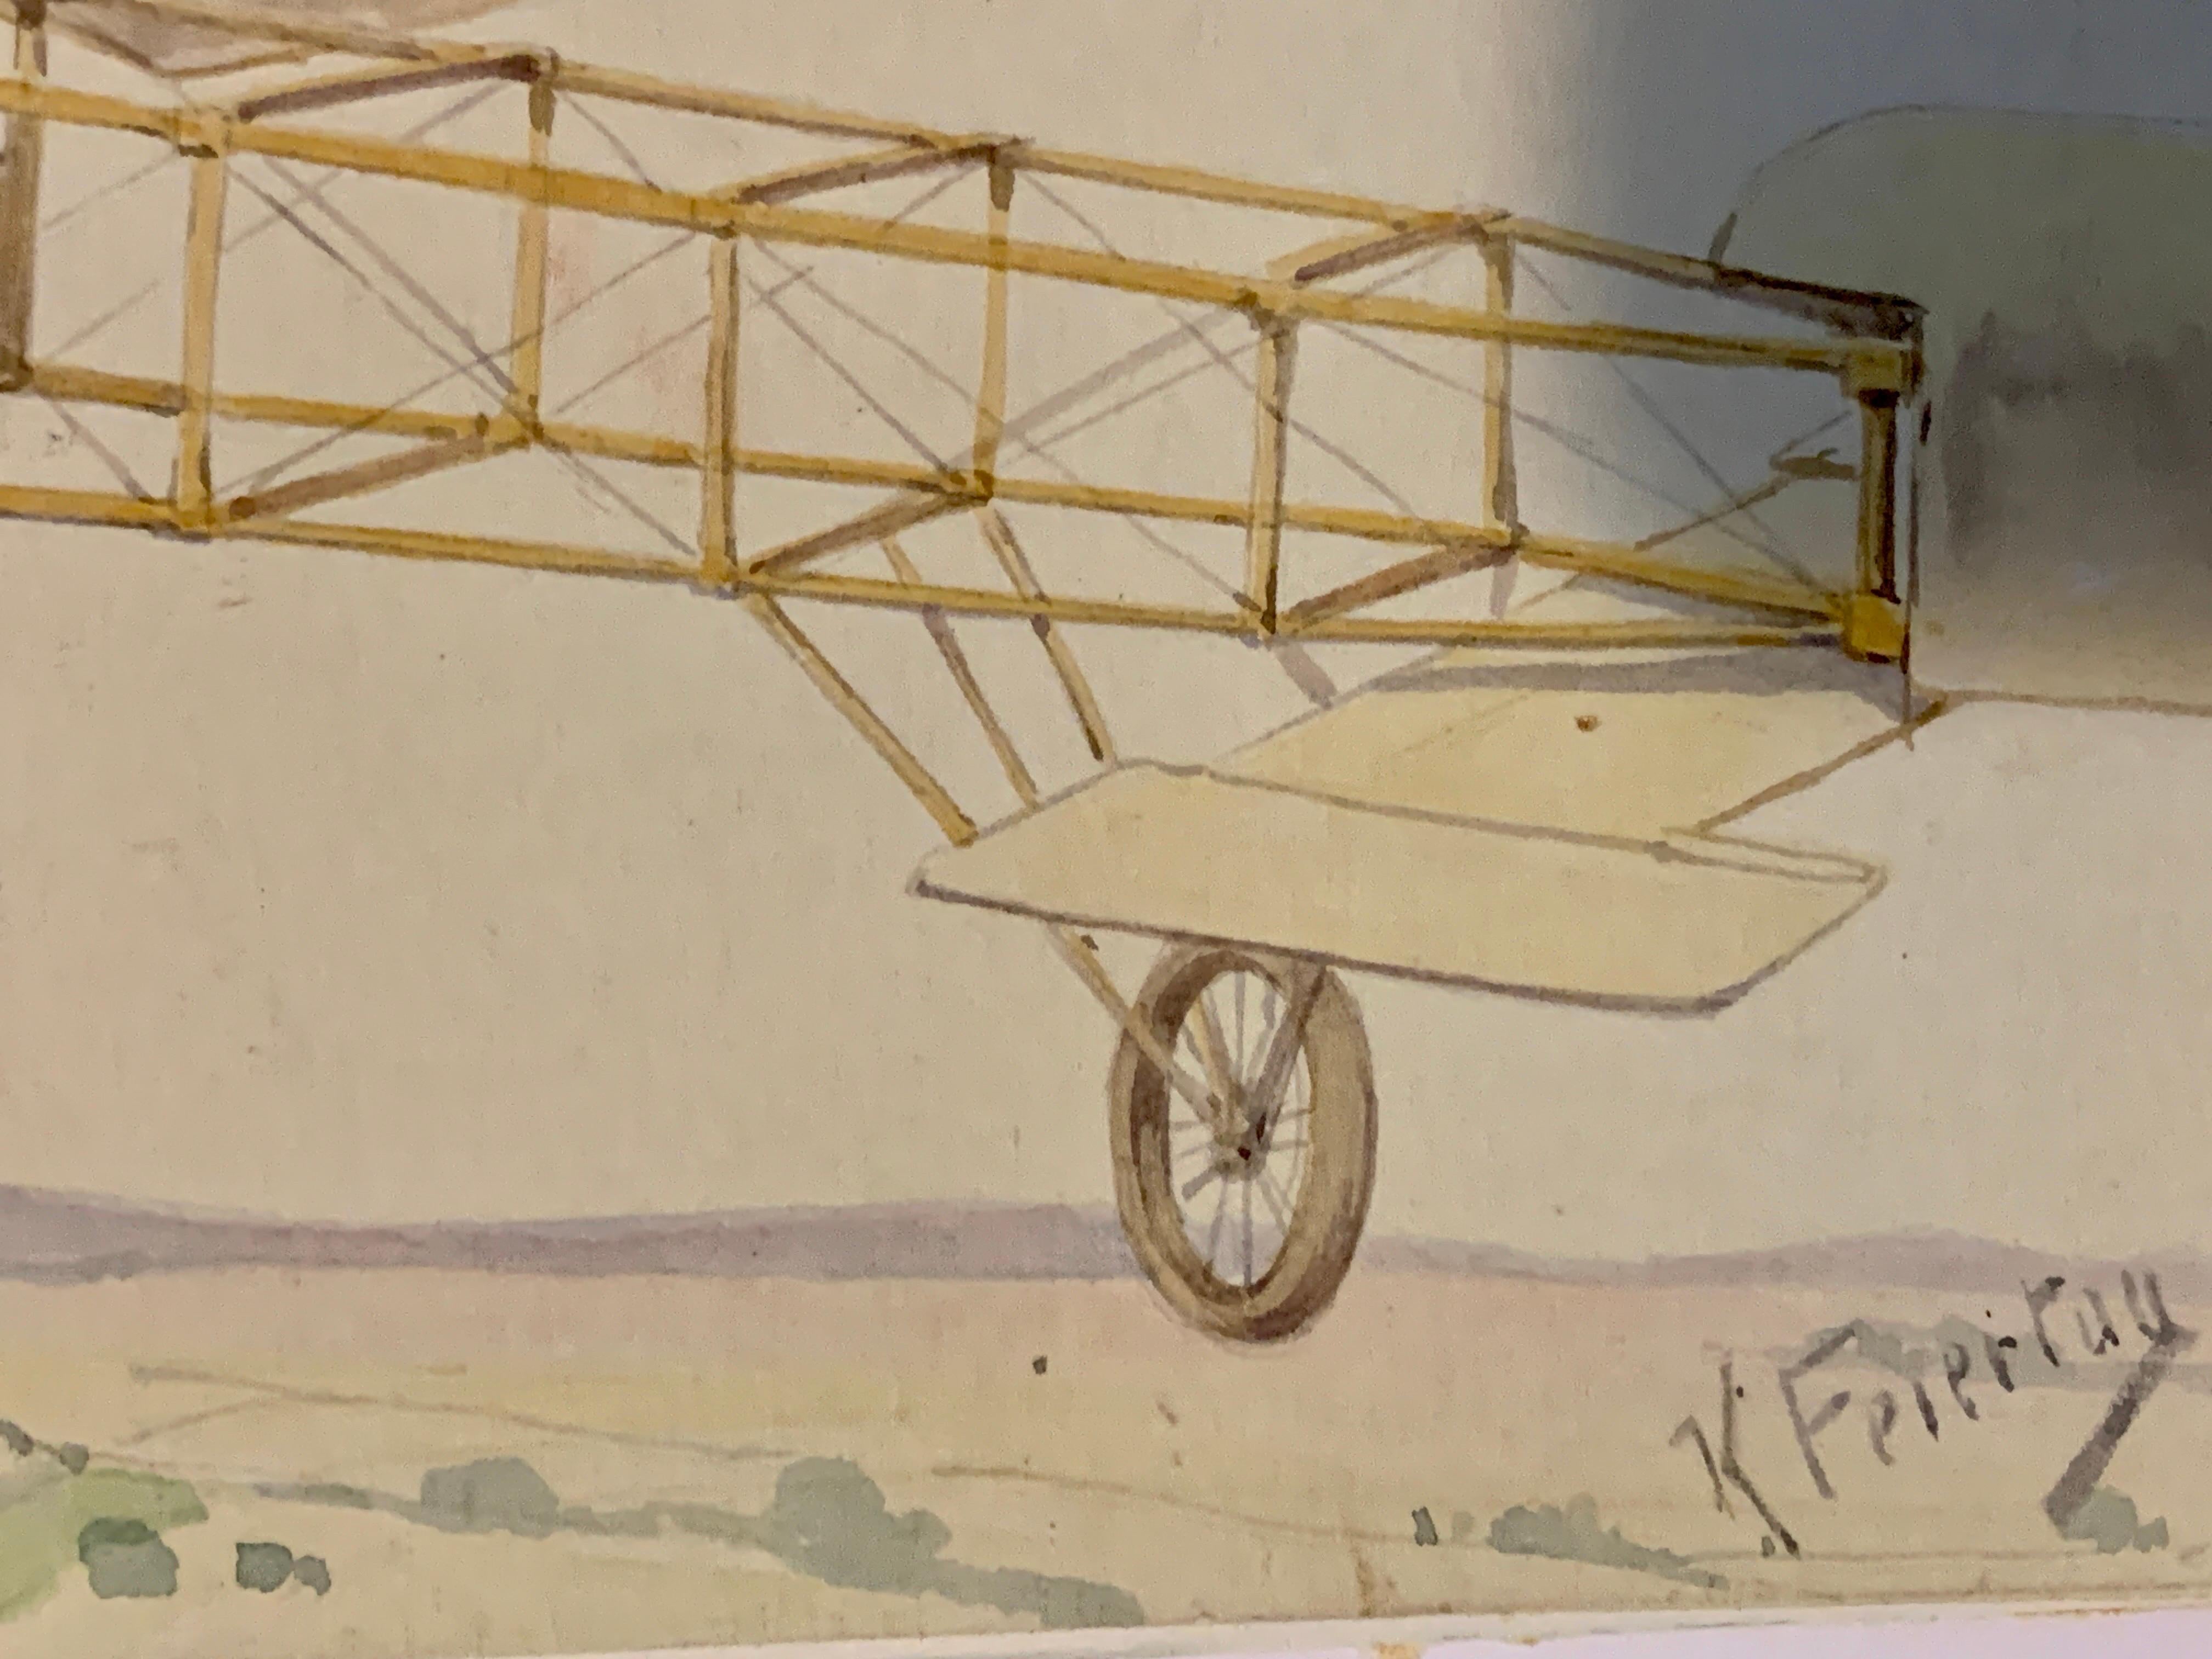 German 19th century watercolor of children flying in a plane over a landscape  - Victorian Art by Karl Feiertag